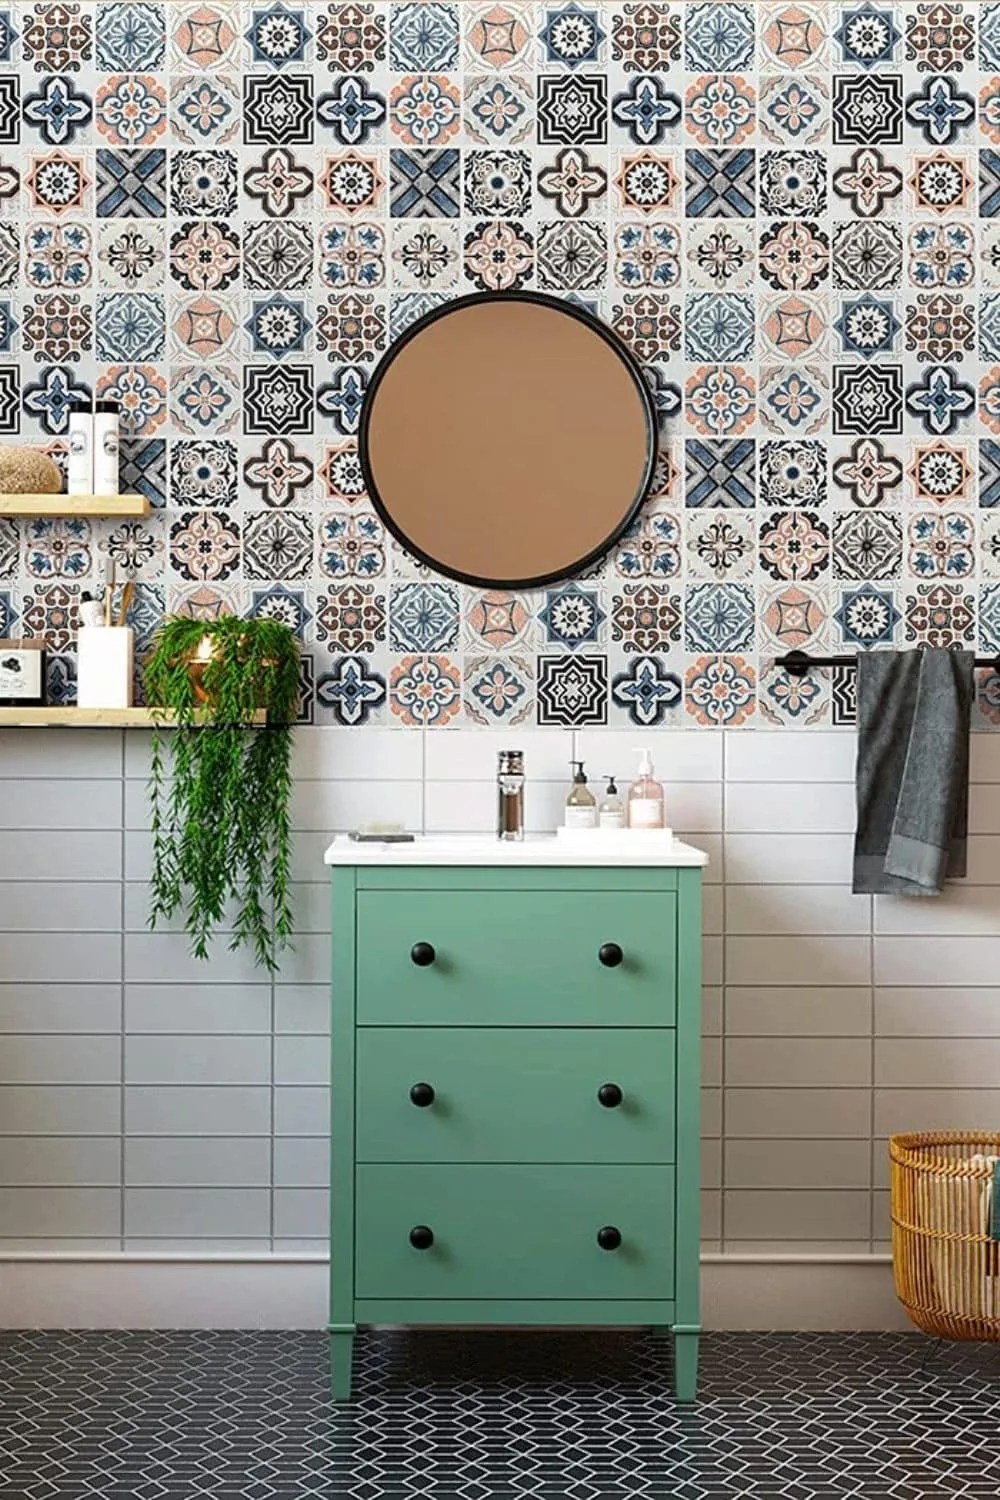 Bathroom Wallpaper Tiles – 10 Easy Ways to Update your Bathroom on a Budget